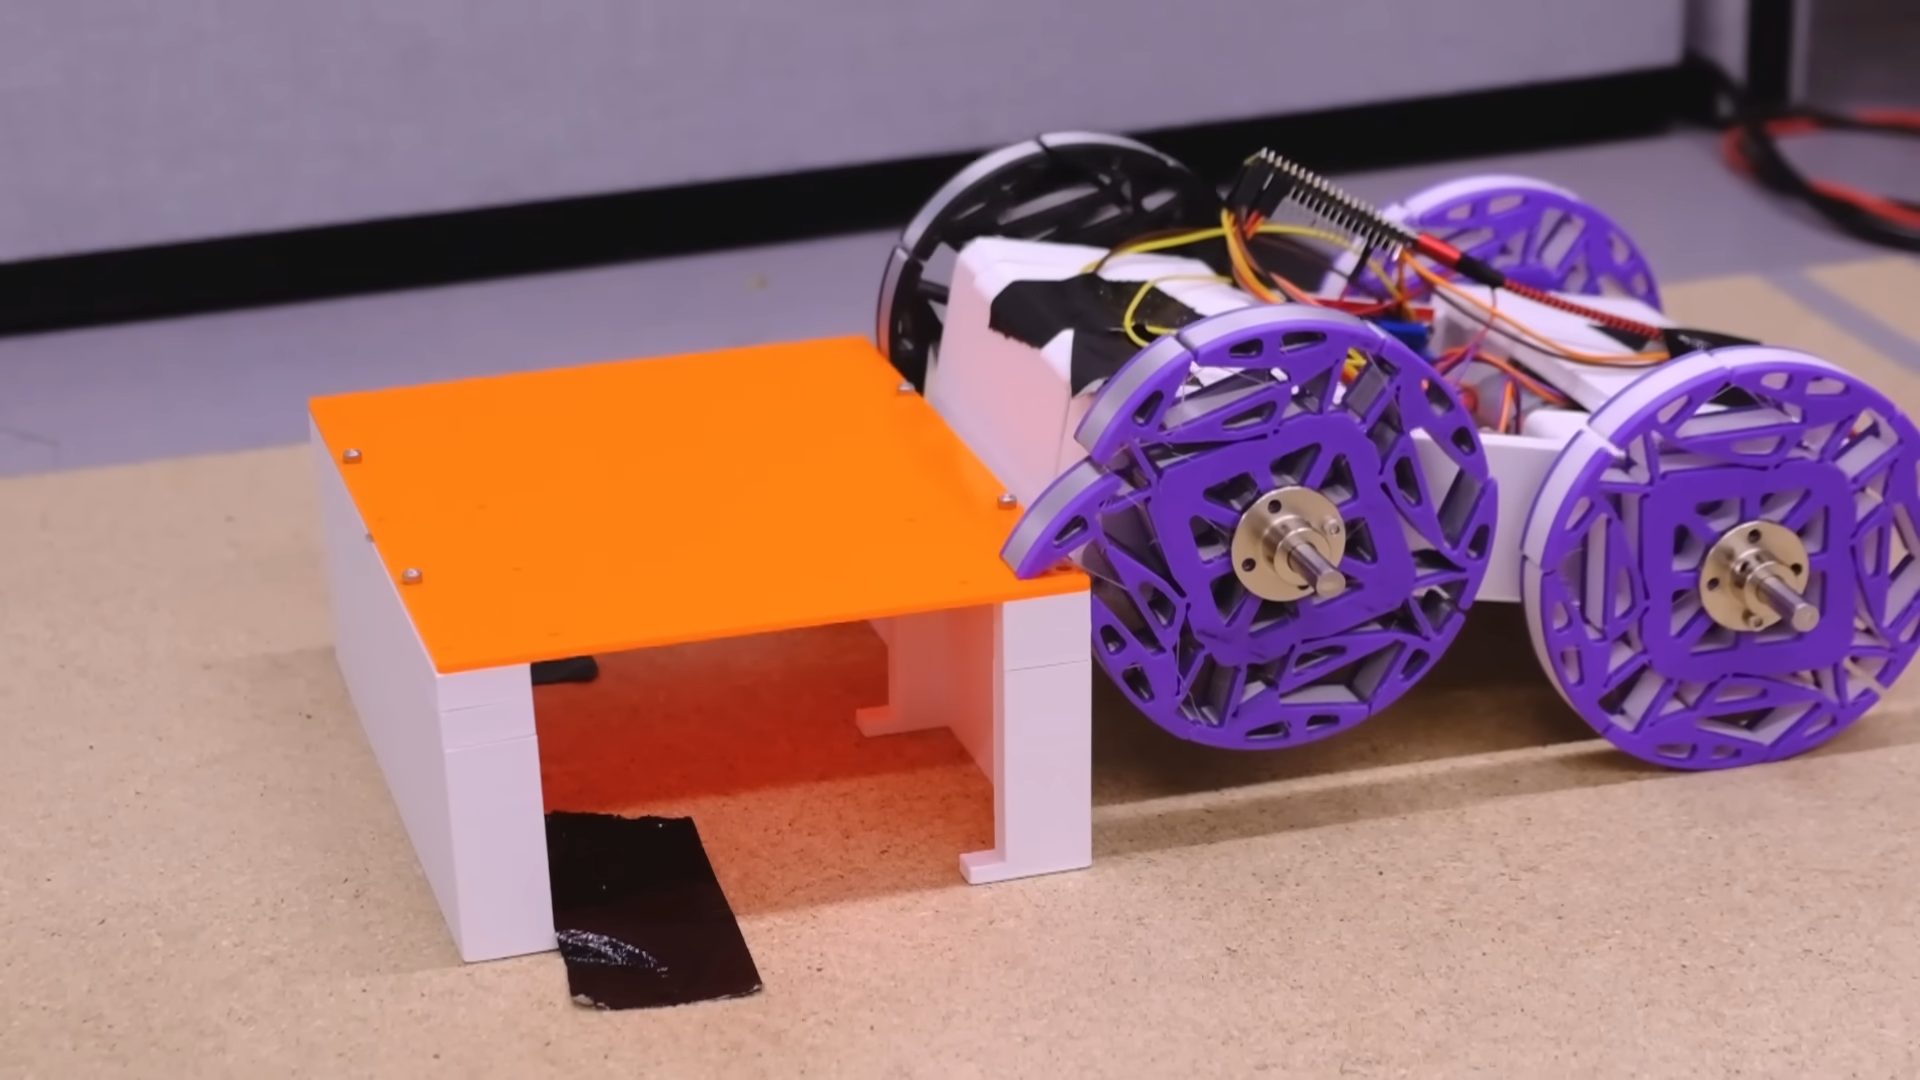 3D Printed Wheels Passively Transform To Climb Obstacles